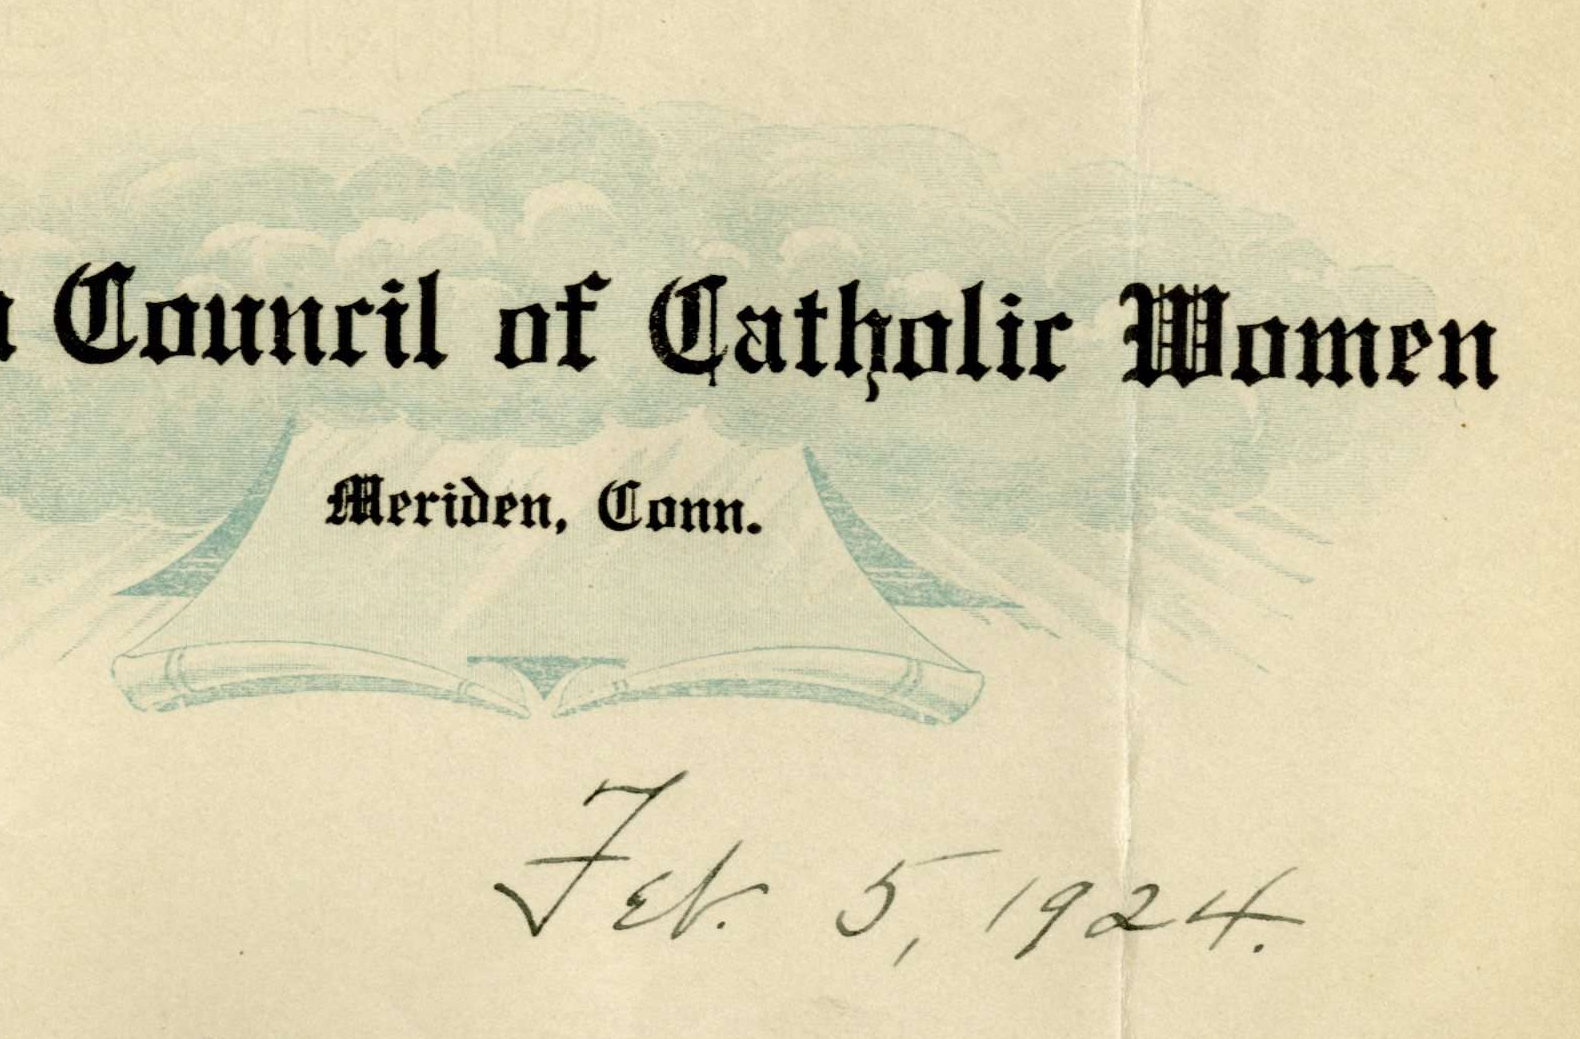 Petition from Connecticut Council of Catholic Women of Hartford and Meriden